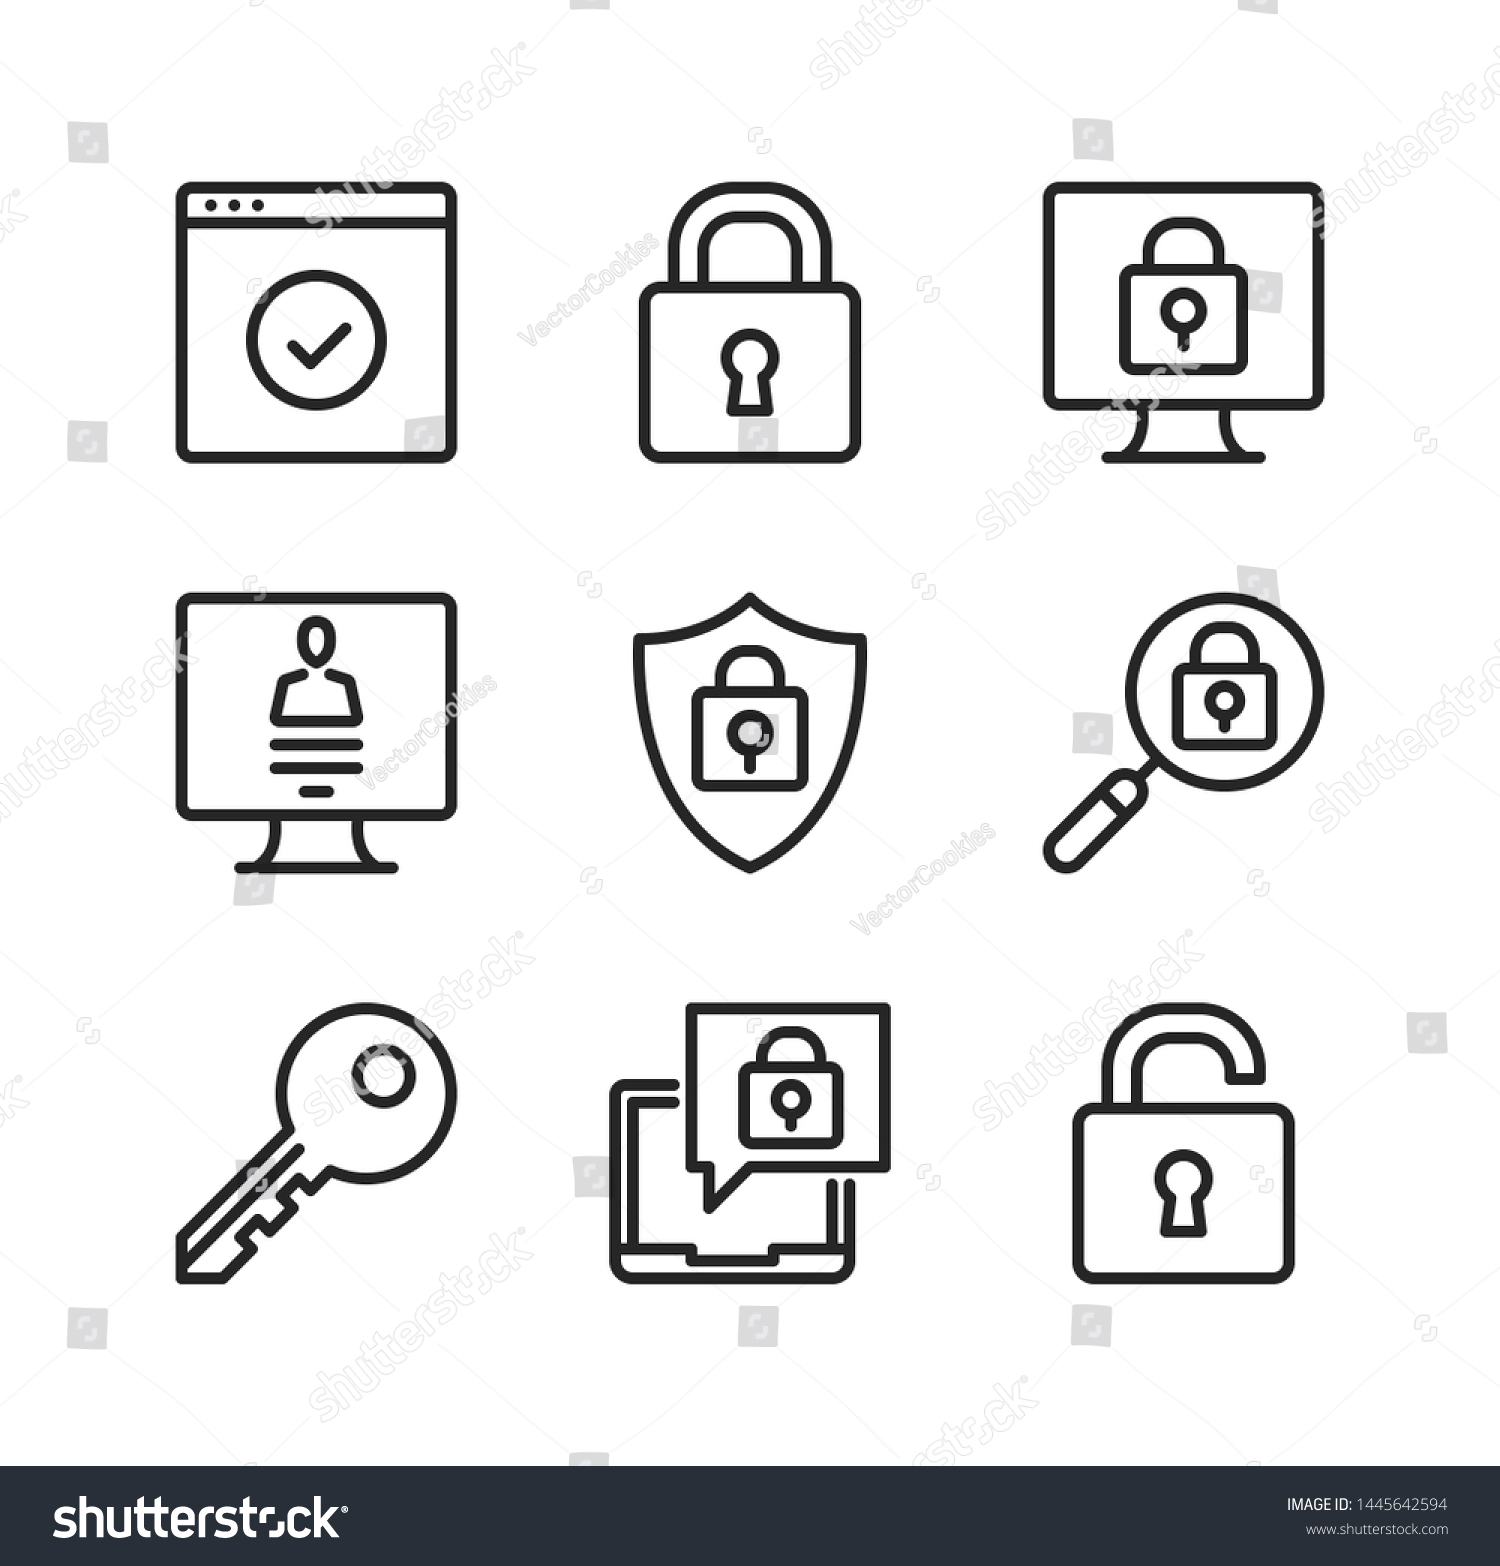 11,021 Cybersecurity icons Images, Stock Photos & Vectors ...